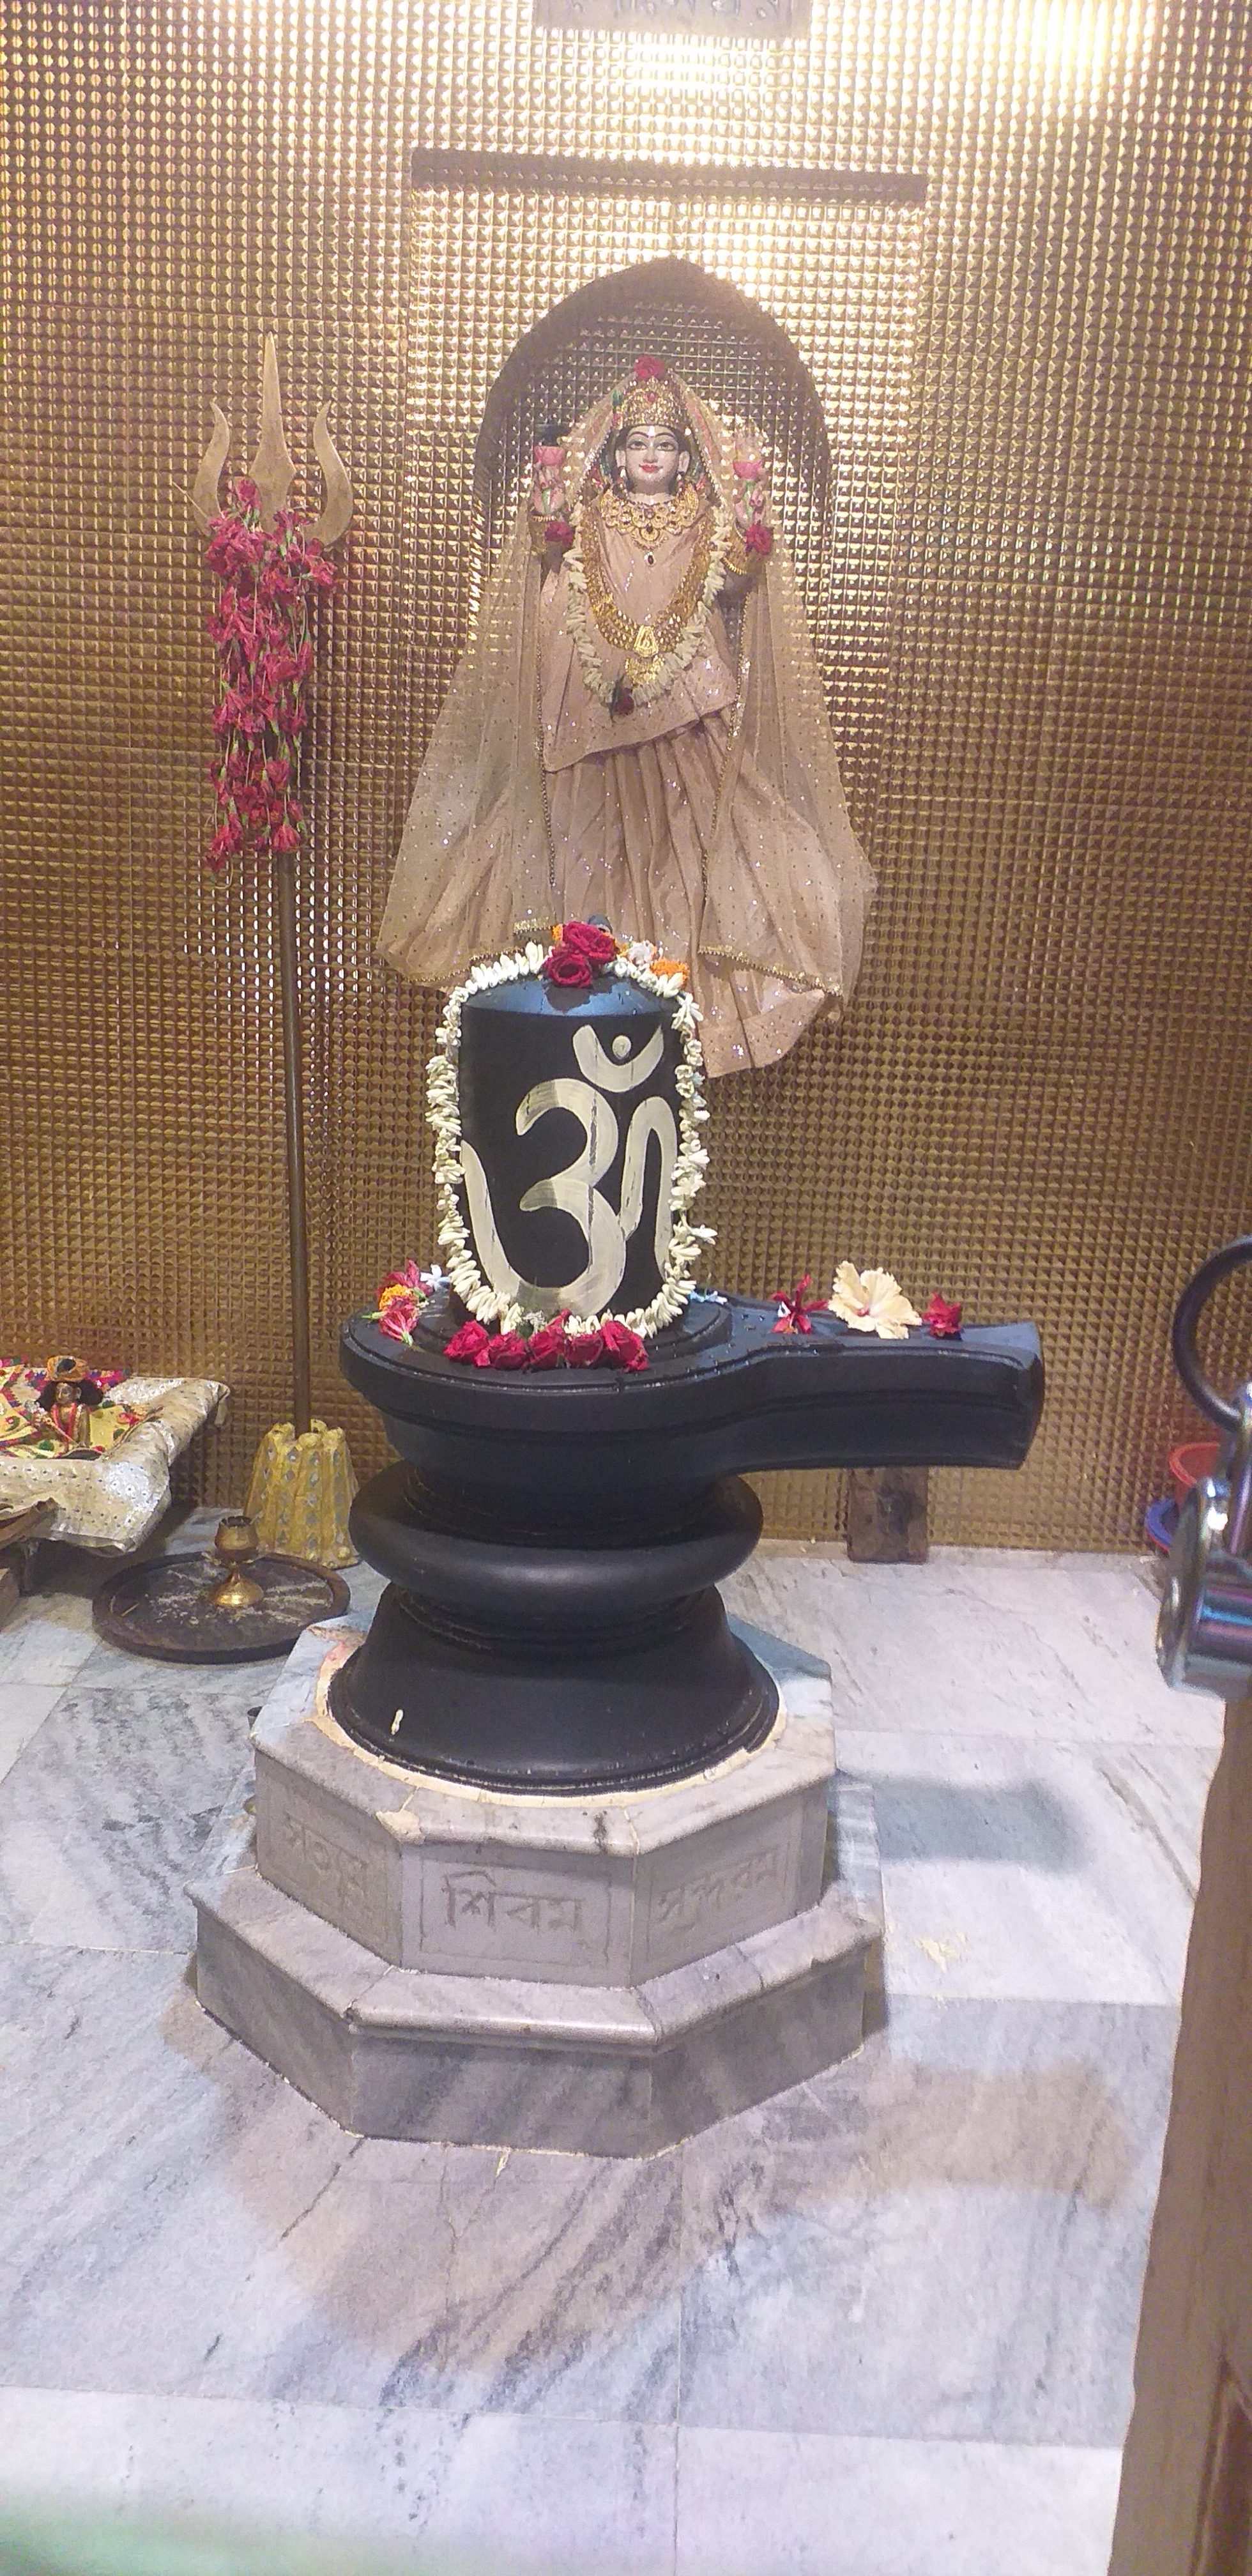 May Lord Shiva Bless you